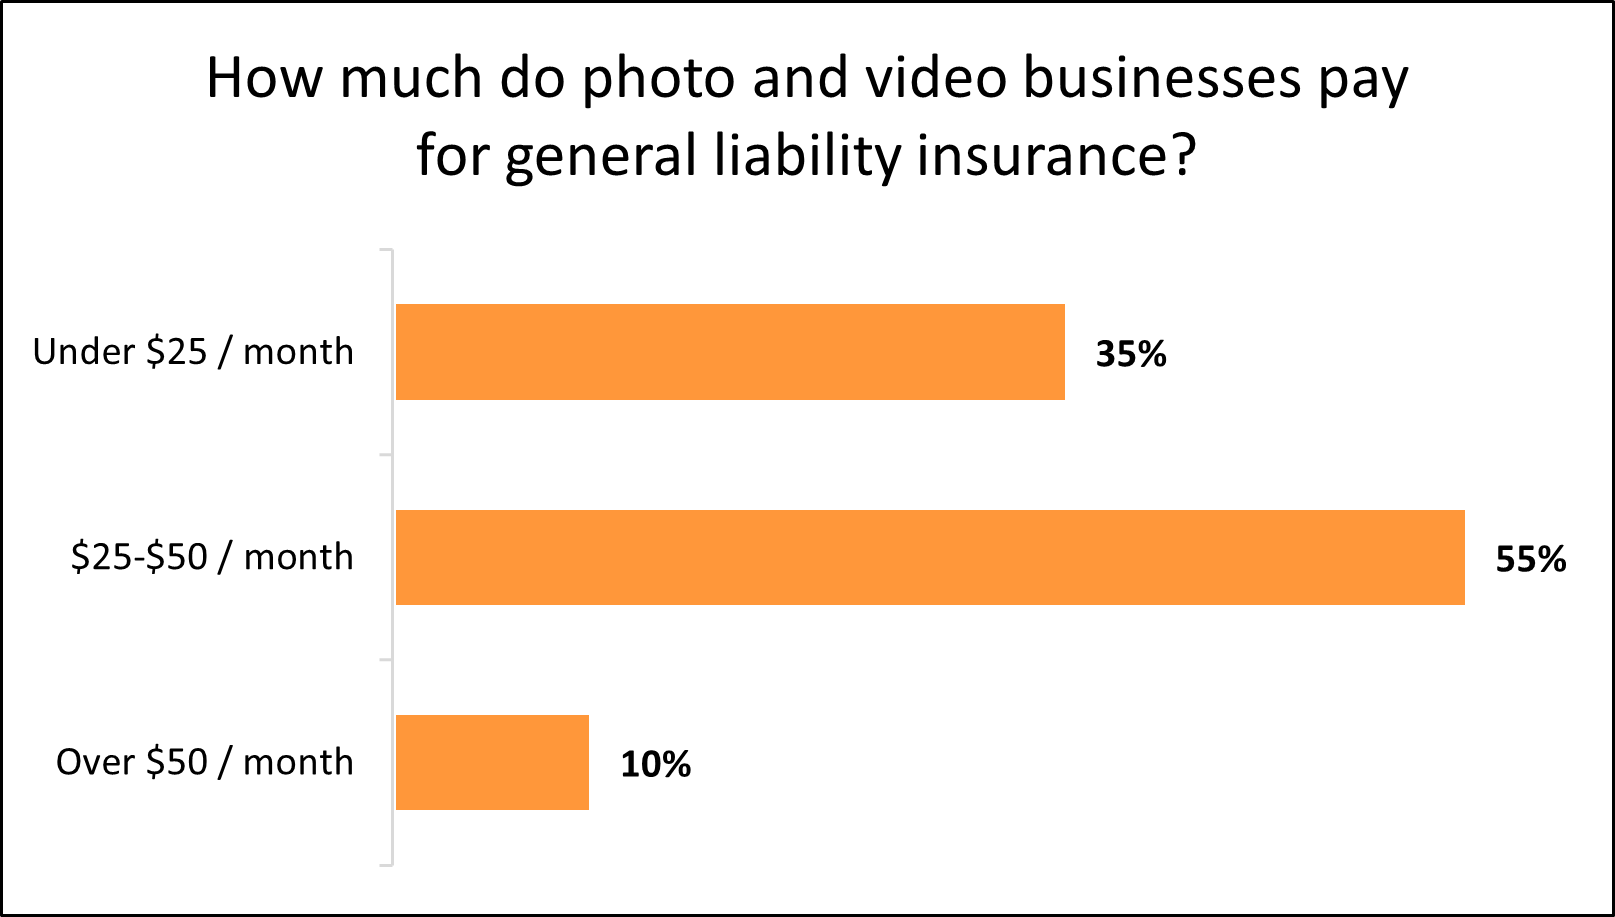 Chart: How much do photo and video businesses pay for general liability insurance?